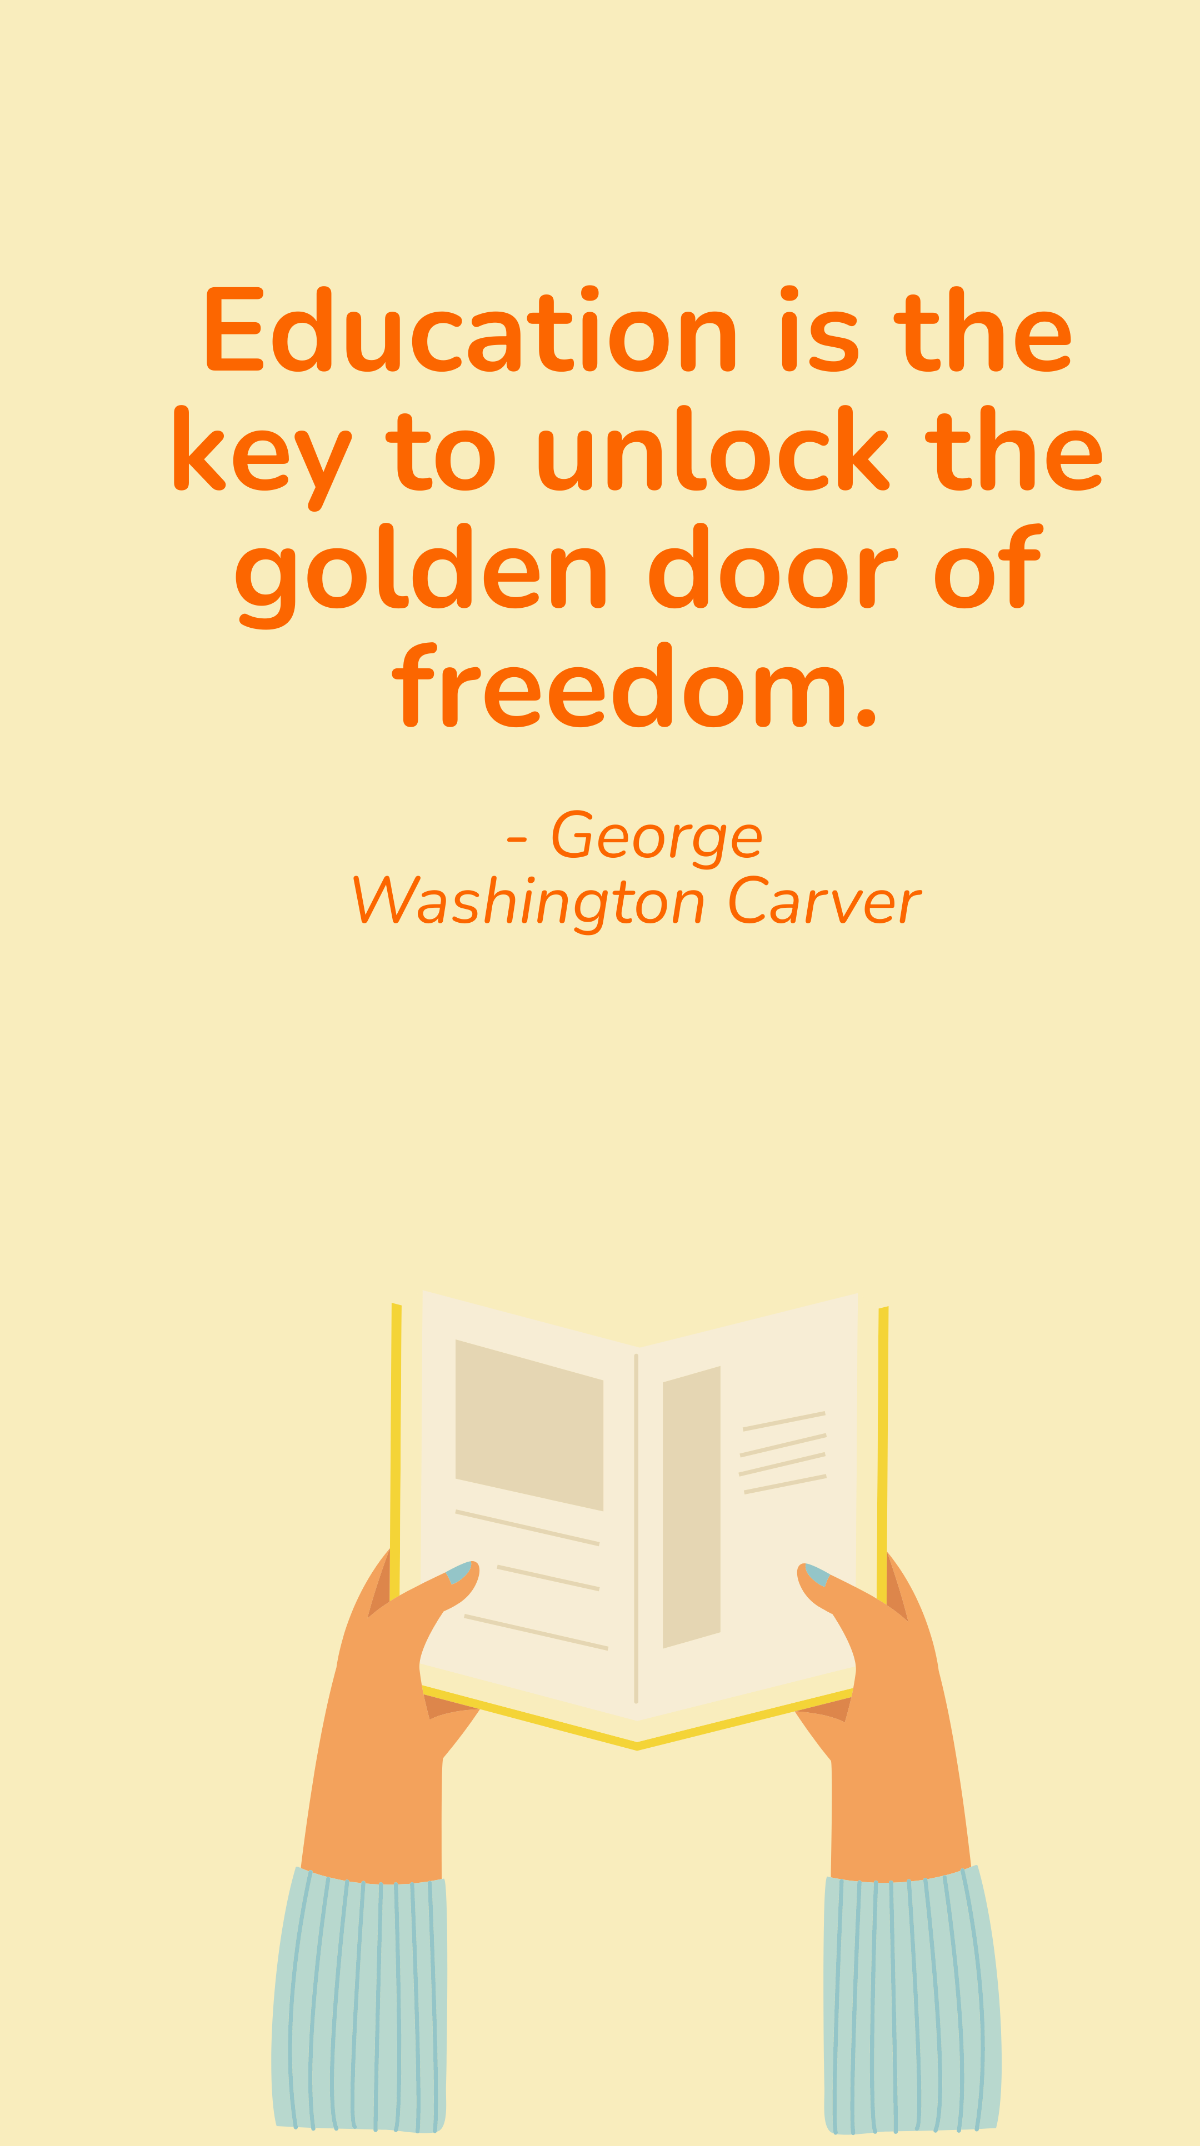 George Washington Carver - Education is the key to unlock the golden door of freedom. Template